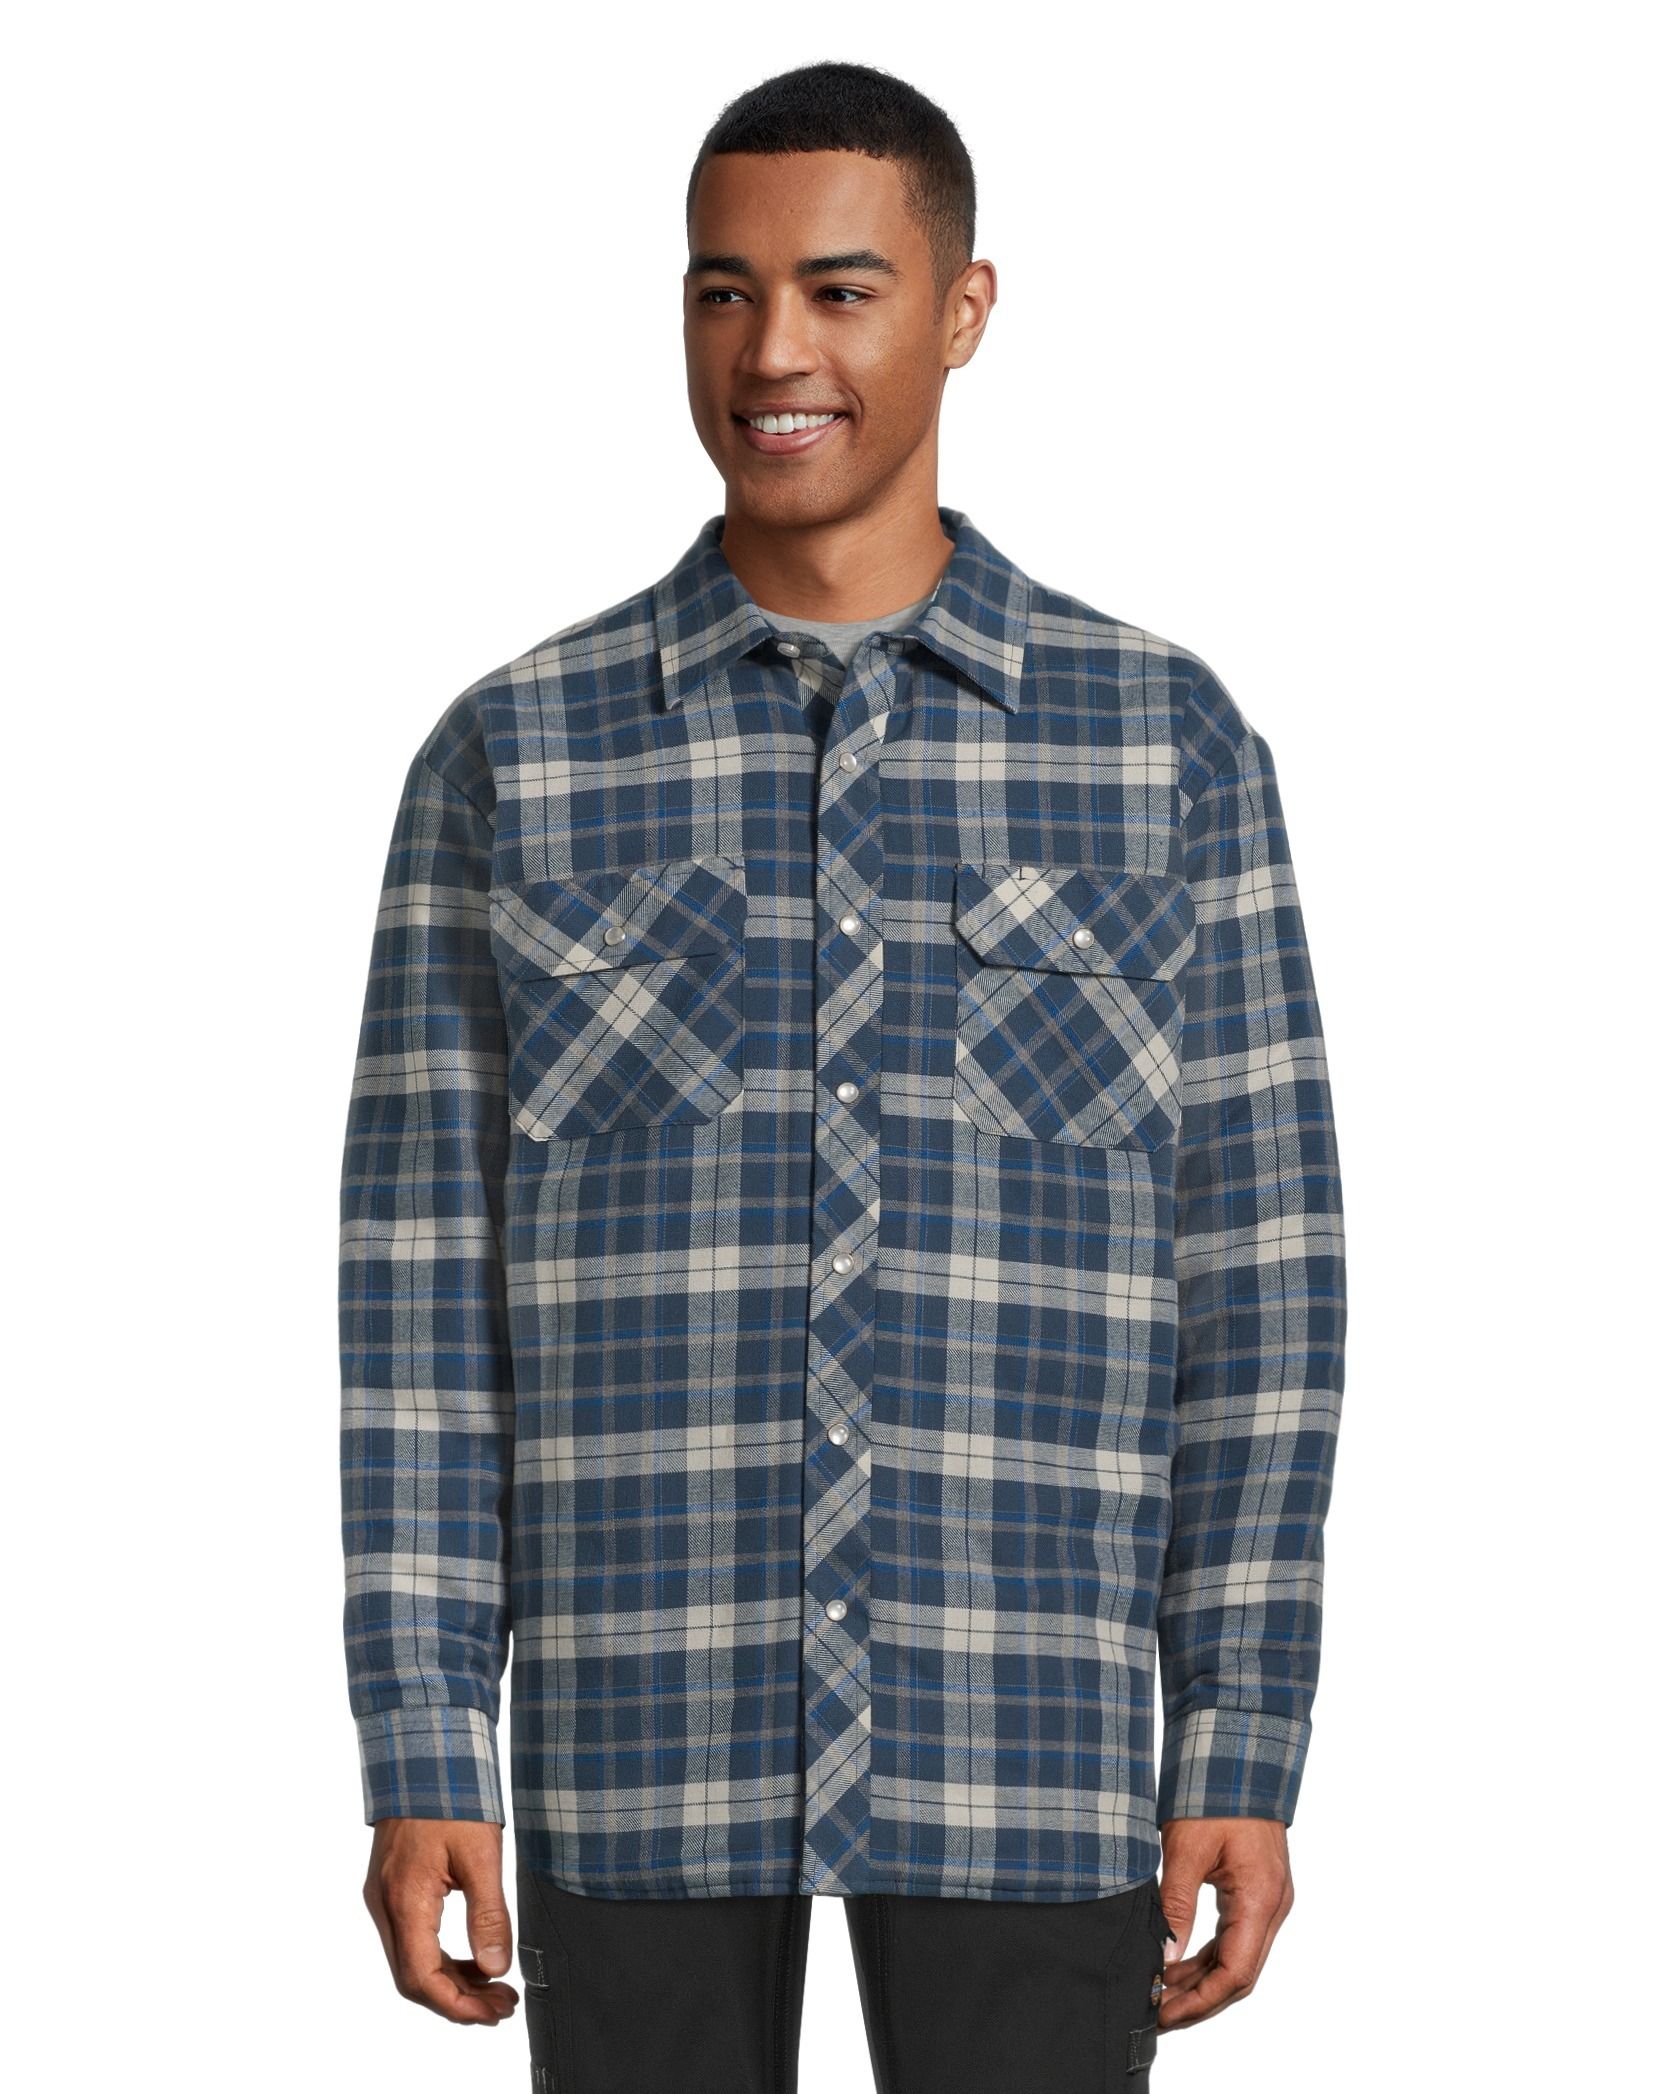 Aggressor Men's Snap-Front Insulated Quilted Flannel Work Shirt